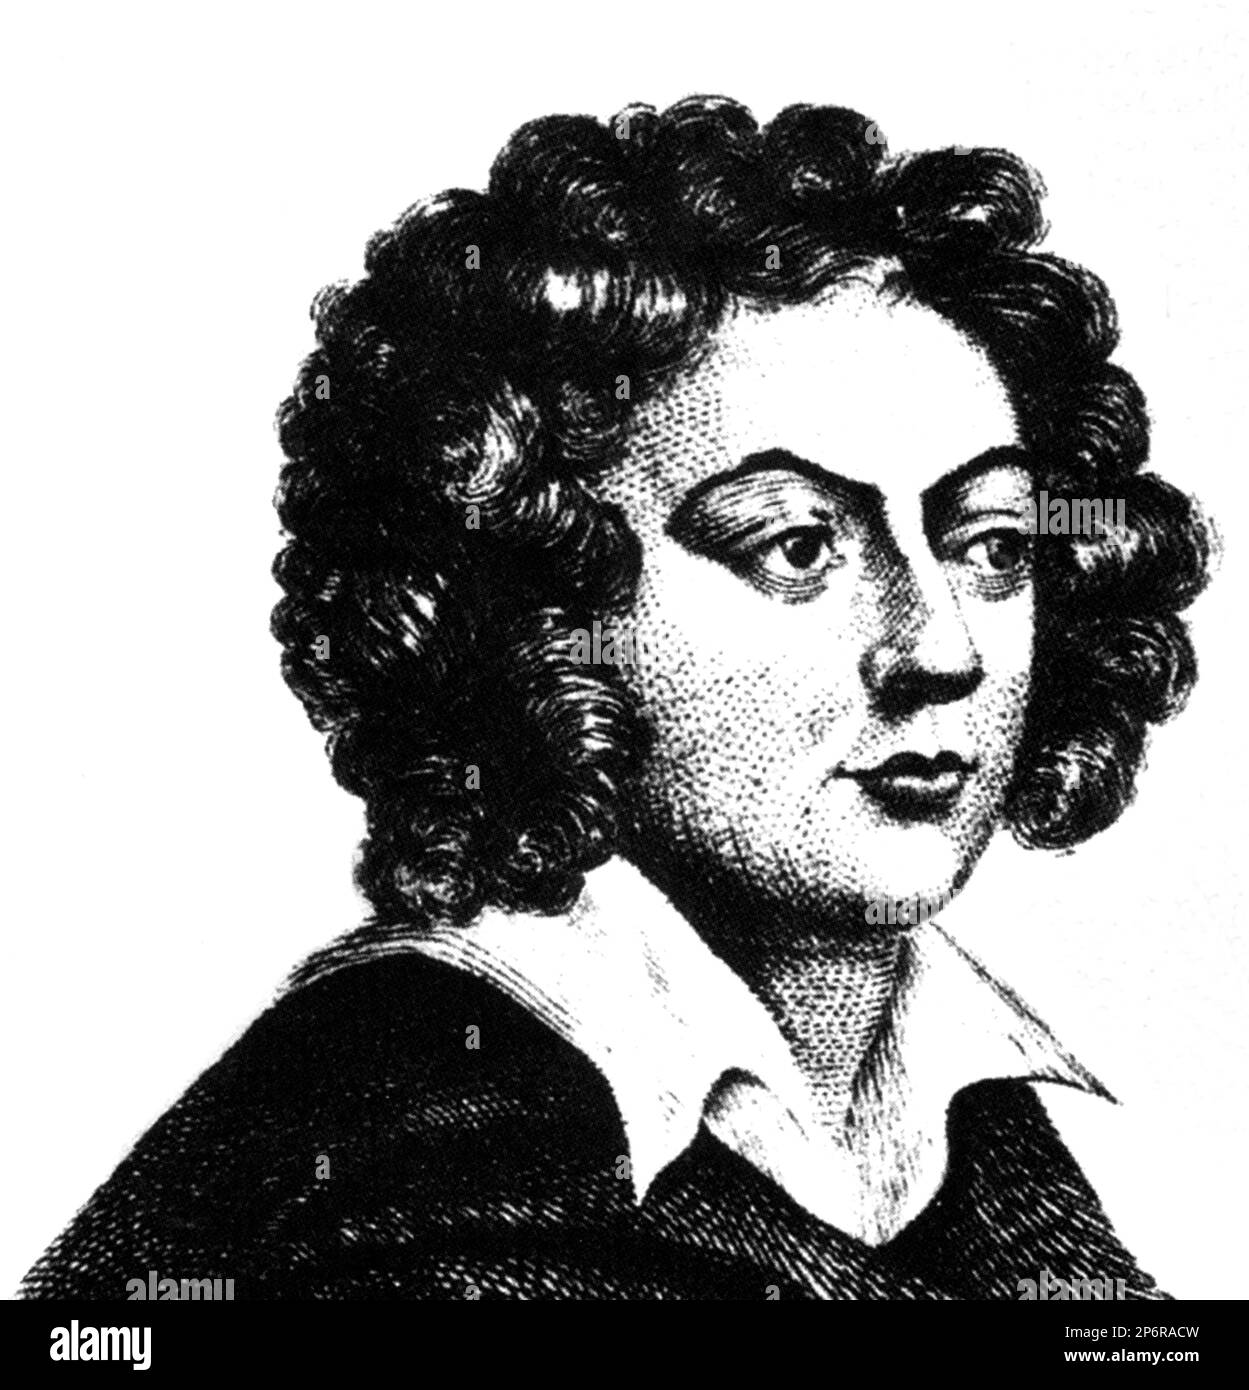 The Baroque music composer HENRY PURCELL ( 1659 – 1695 ),  is generally considered to be one of England's greatest composers. Purcell incorporated Italian and French stylistic elements but devised a peculiarly English style of Baroque music . - COMPOSITORE - OPERA LIRICA - CLASSICA - CLASSICAL - PORTRAIT - RITRATTO - MUSICISTA - MUSICA  - collar - colletto - -- ARCHIVIO GBB Stock Photo